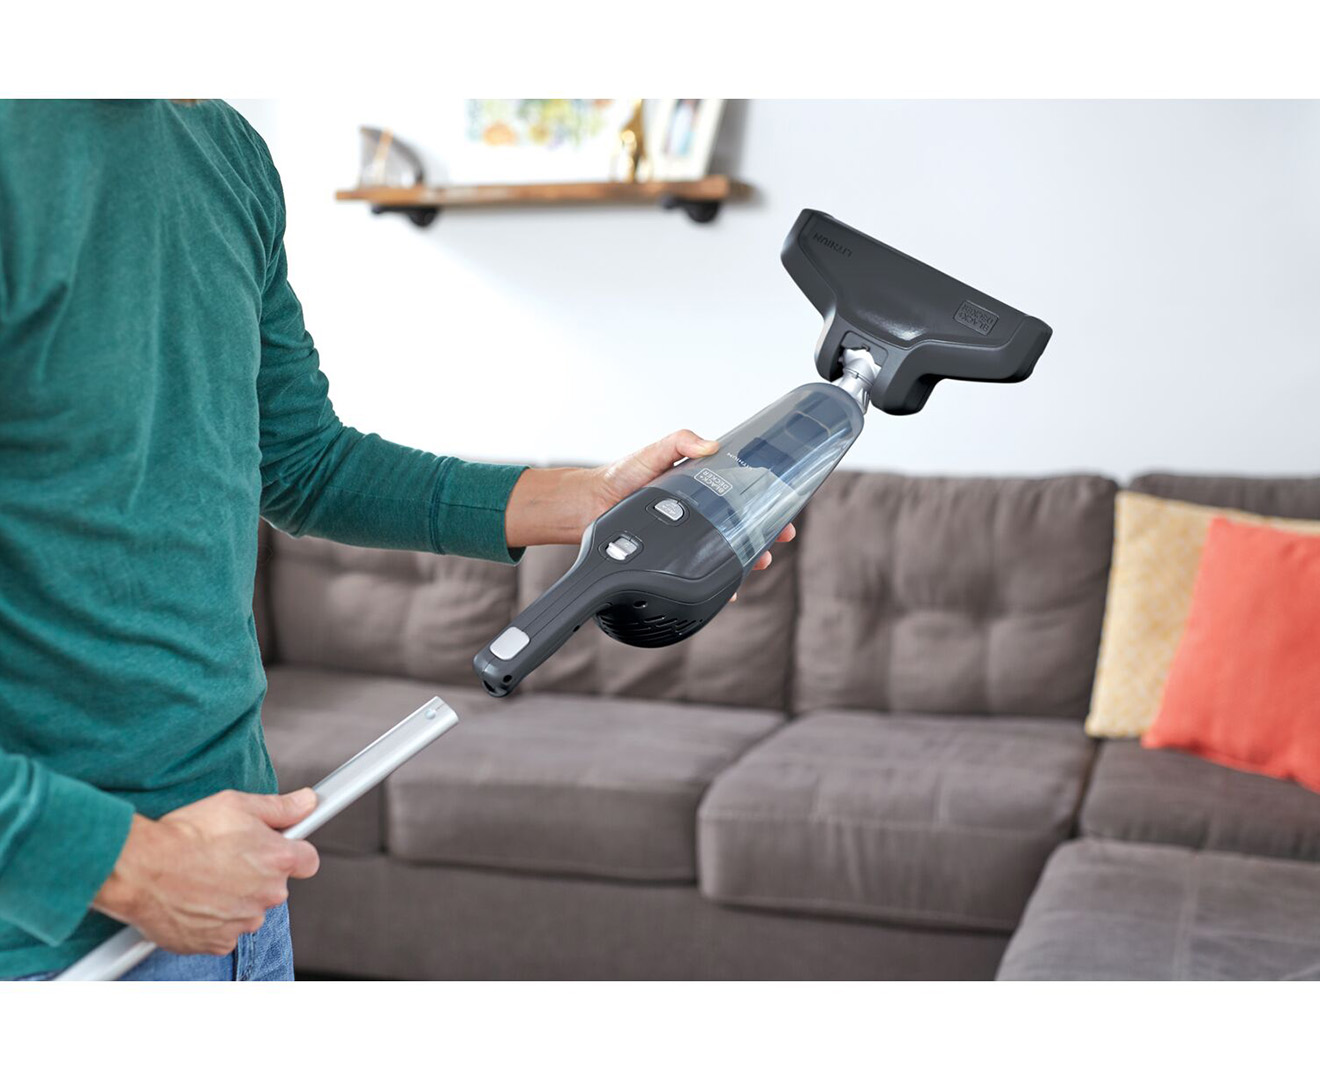 Black & Decker Dust Buster 4 in 1 Cordless Vacuum Cleaner 16.2 WH